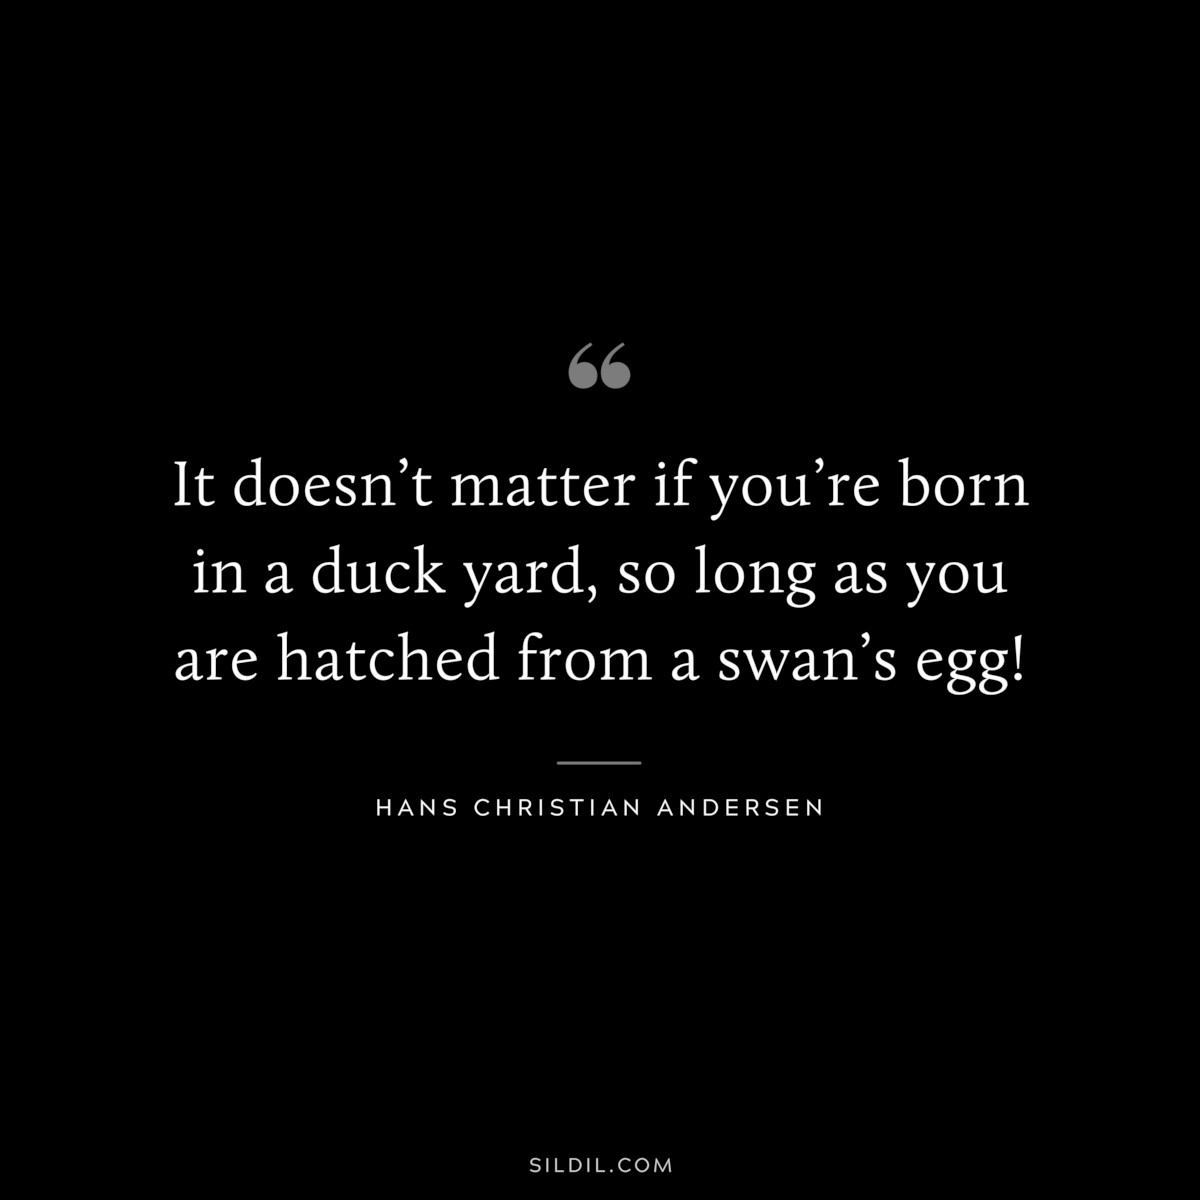 It doesn’t matter if you’re born in a duck yard, so long as you are hatched from a swan’s egg! ― Hans Christian Andersen